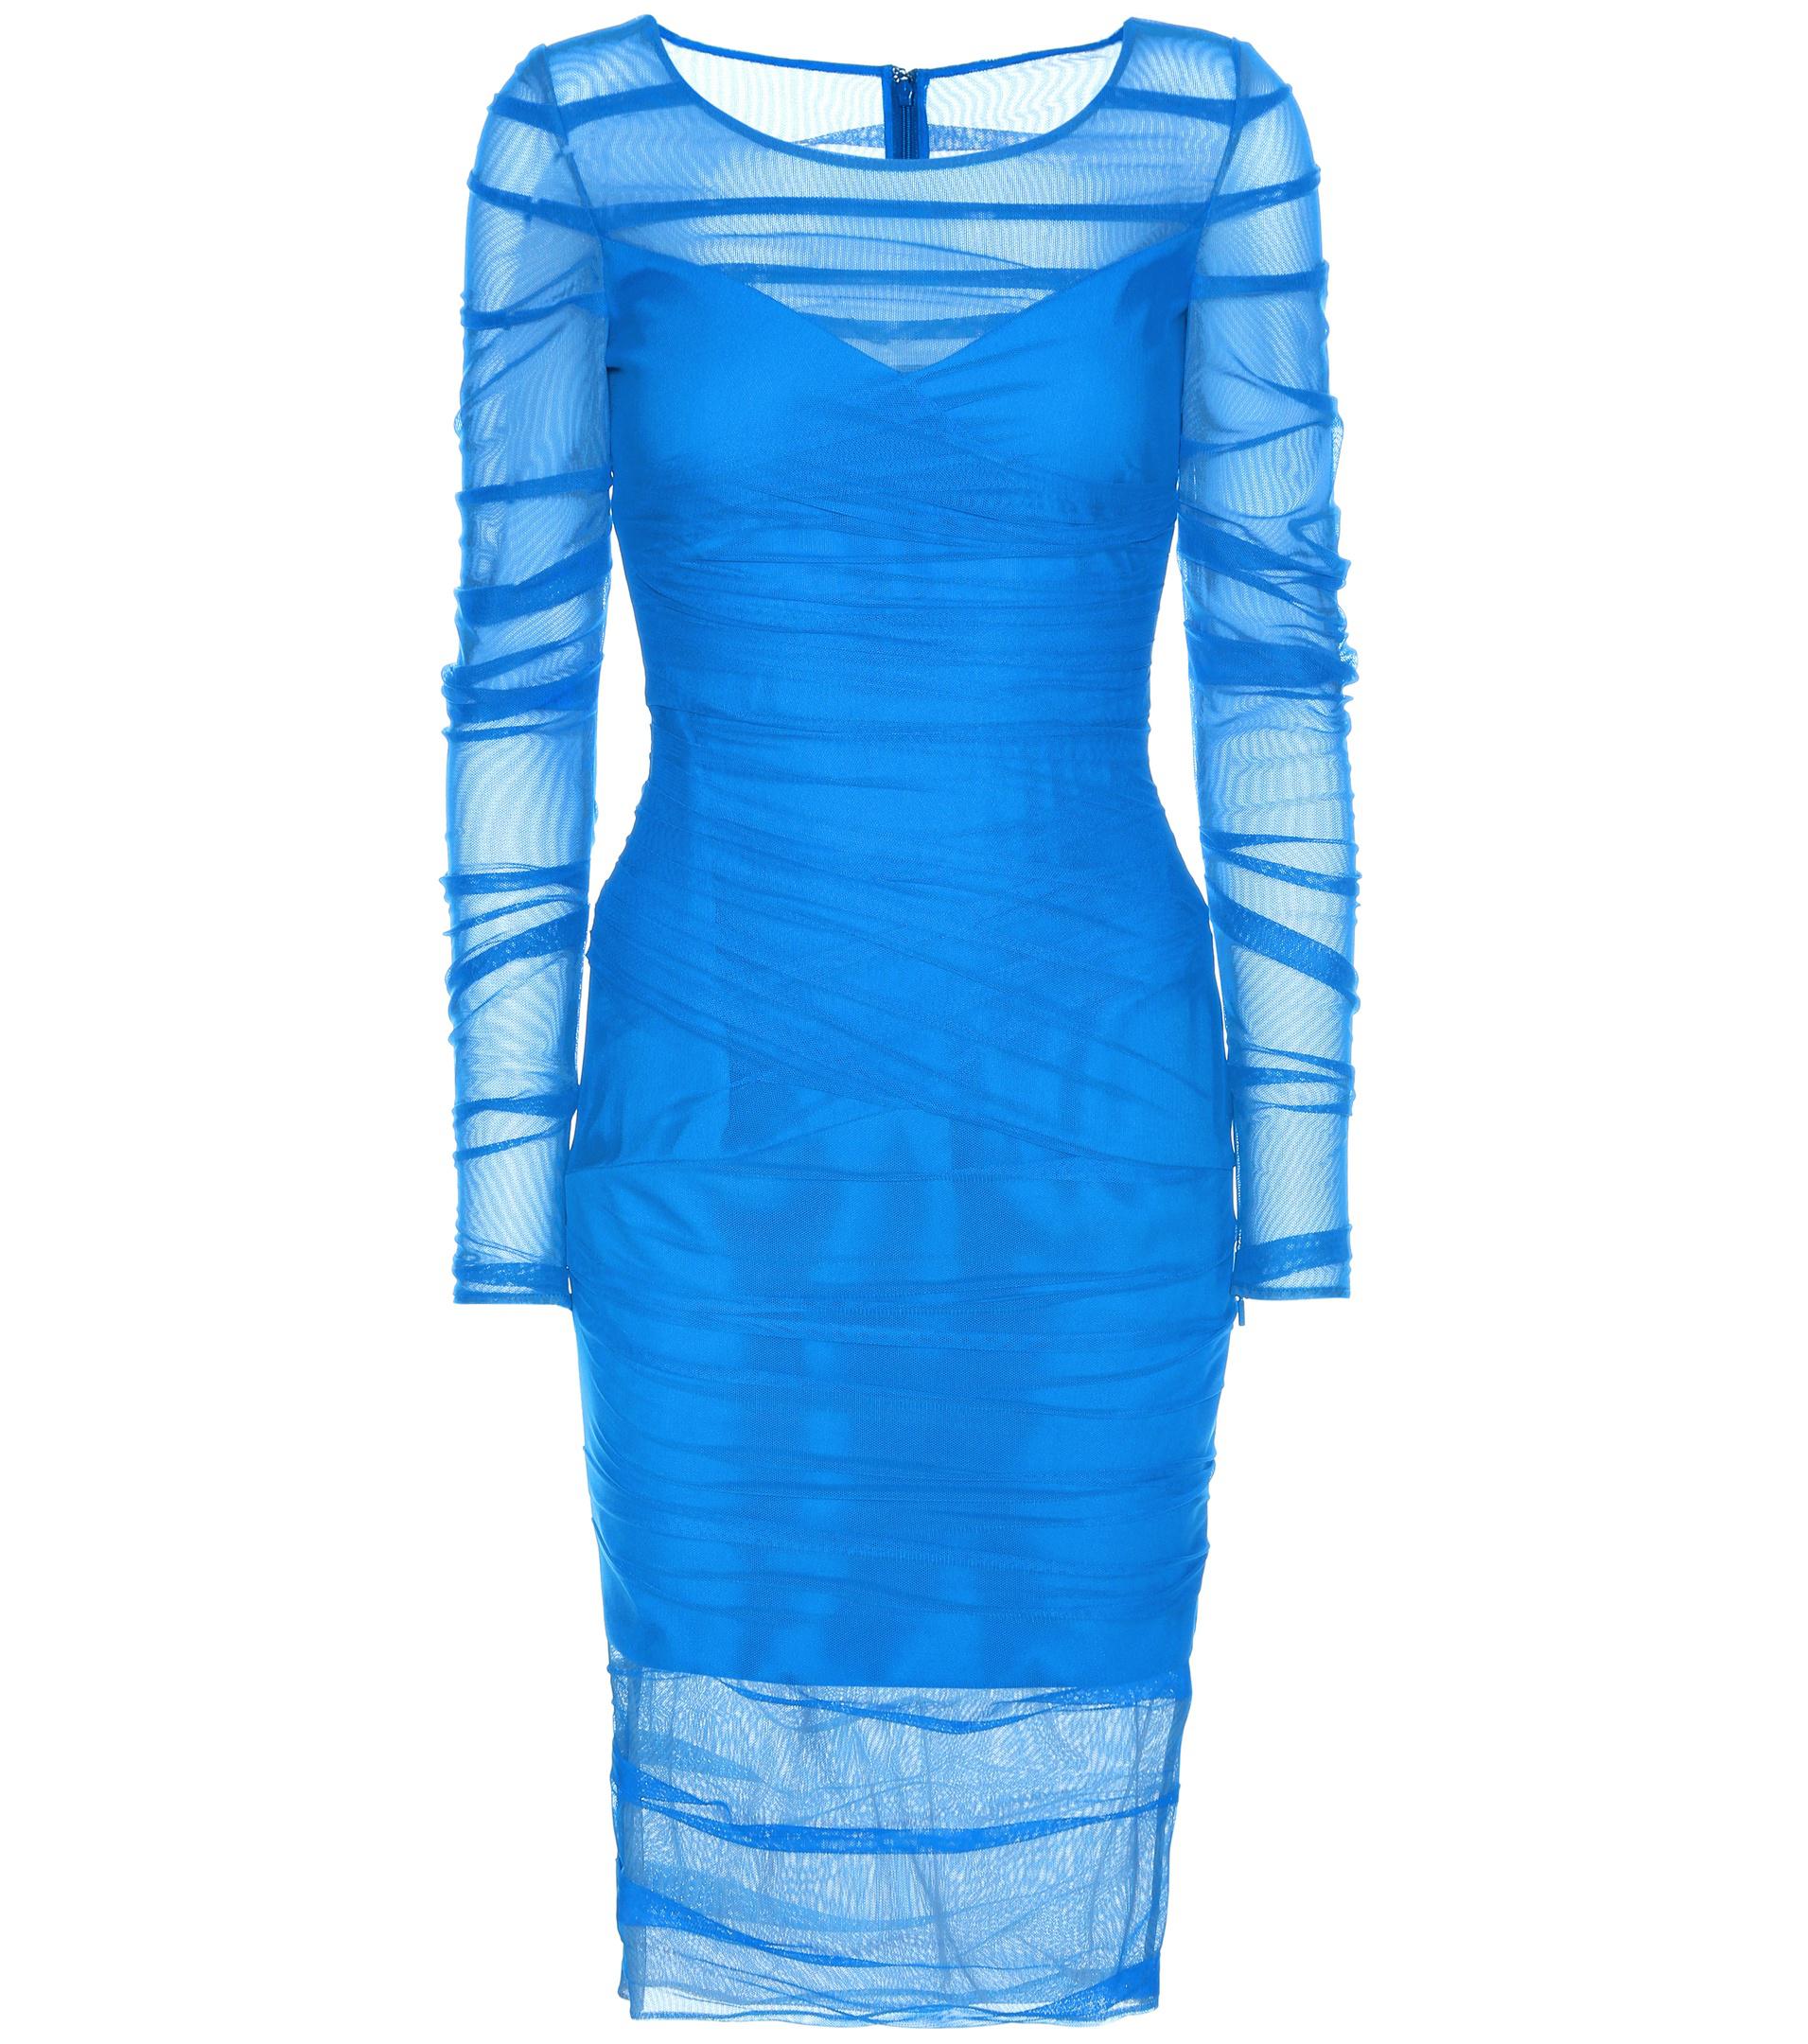 Versace Ruched Mesh Dress in Blue - Lyst